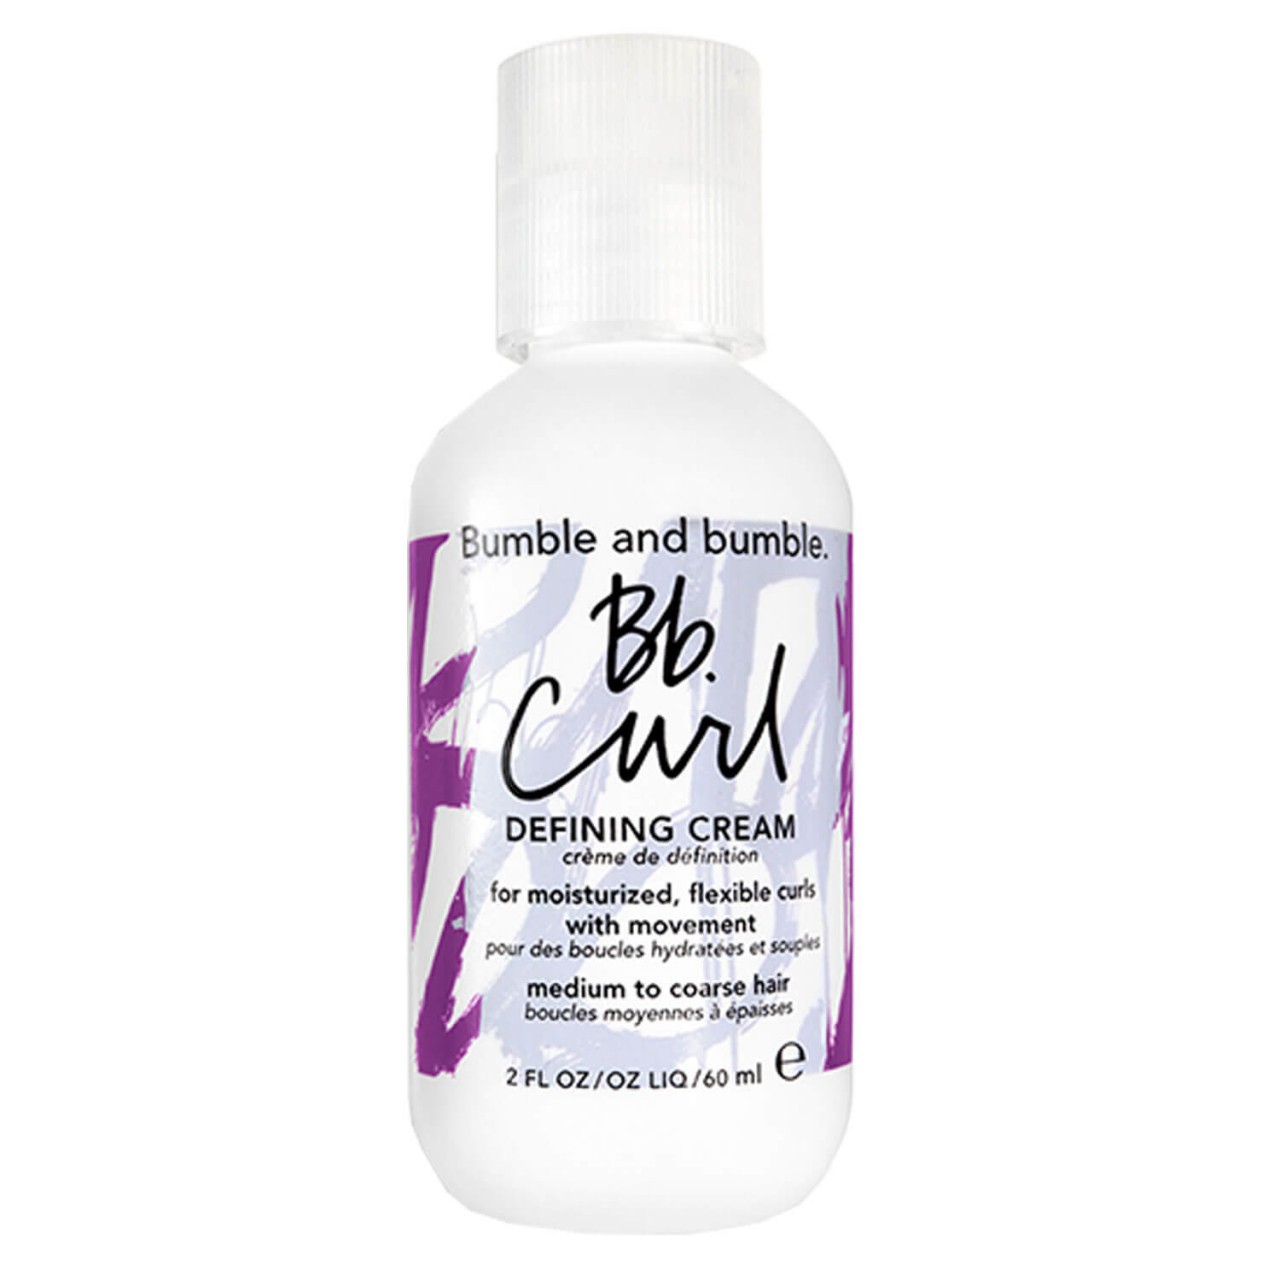 Bb. Curl - Defining Cream von Bumble and bumble.